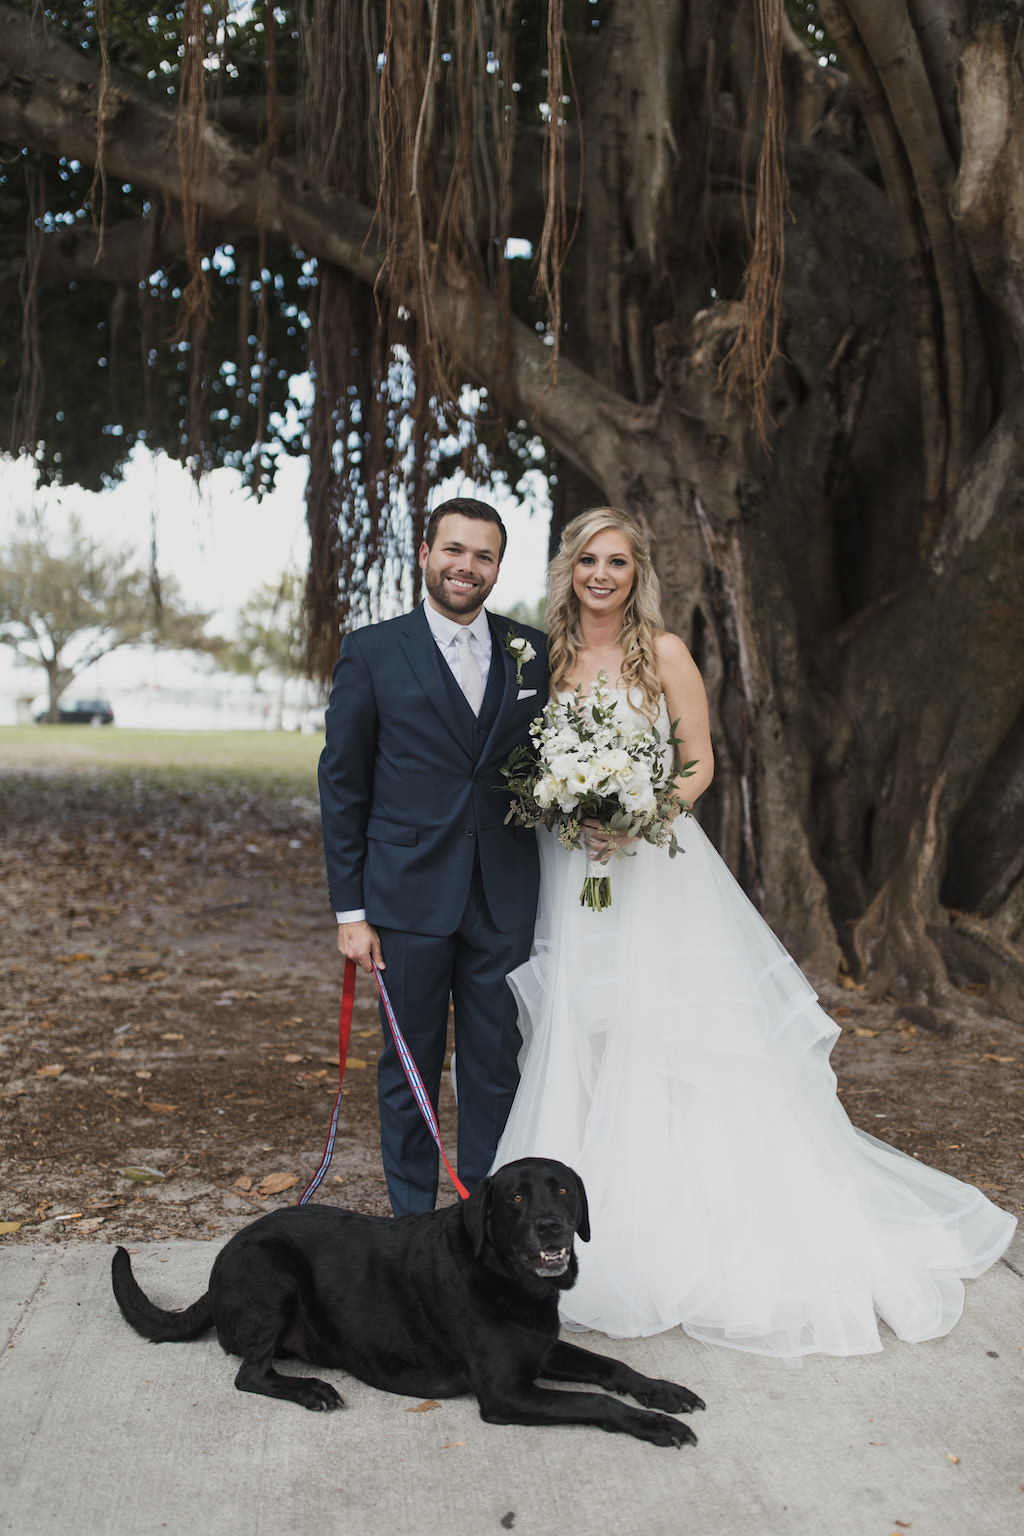 Outdoor Florida Bride and Groom Wedding Portrait, Bride in Strapless Hayley Paige Chantelle Gown, Ivory Tulle Skirt Ball Gown, Lace Corset Bodice with Greenery and Floral Garden Inspired Bouquet, Groom in Navy Blue Suit with Dog | Tampa Bay Wedding Hair and Makeup Artist Michele Renee the Studio